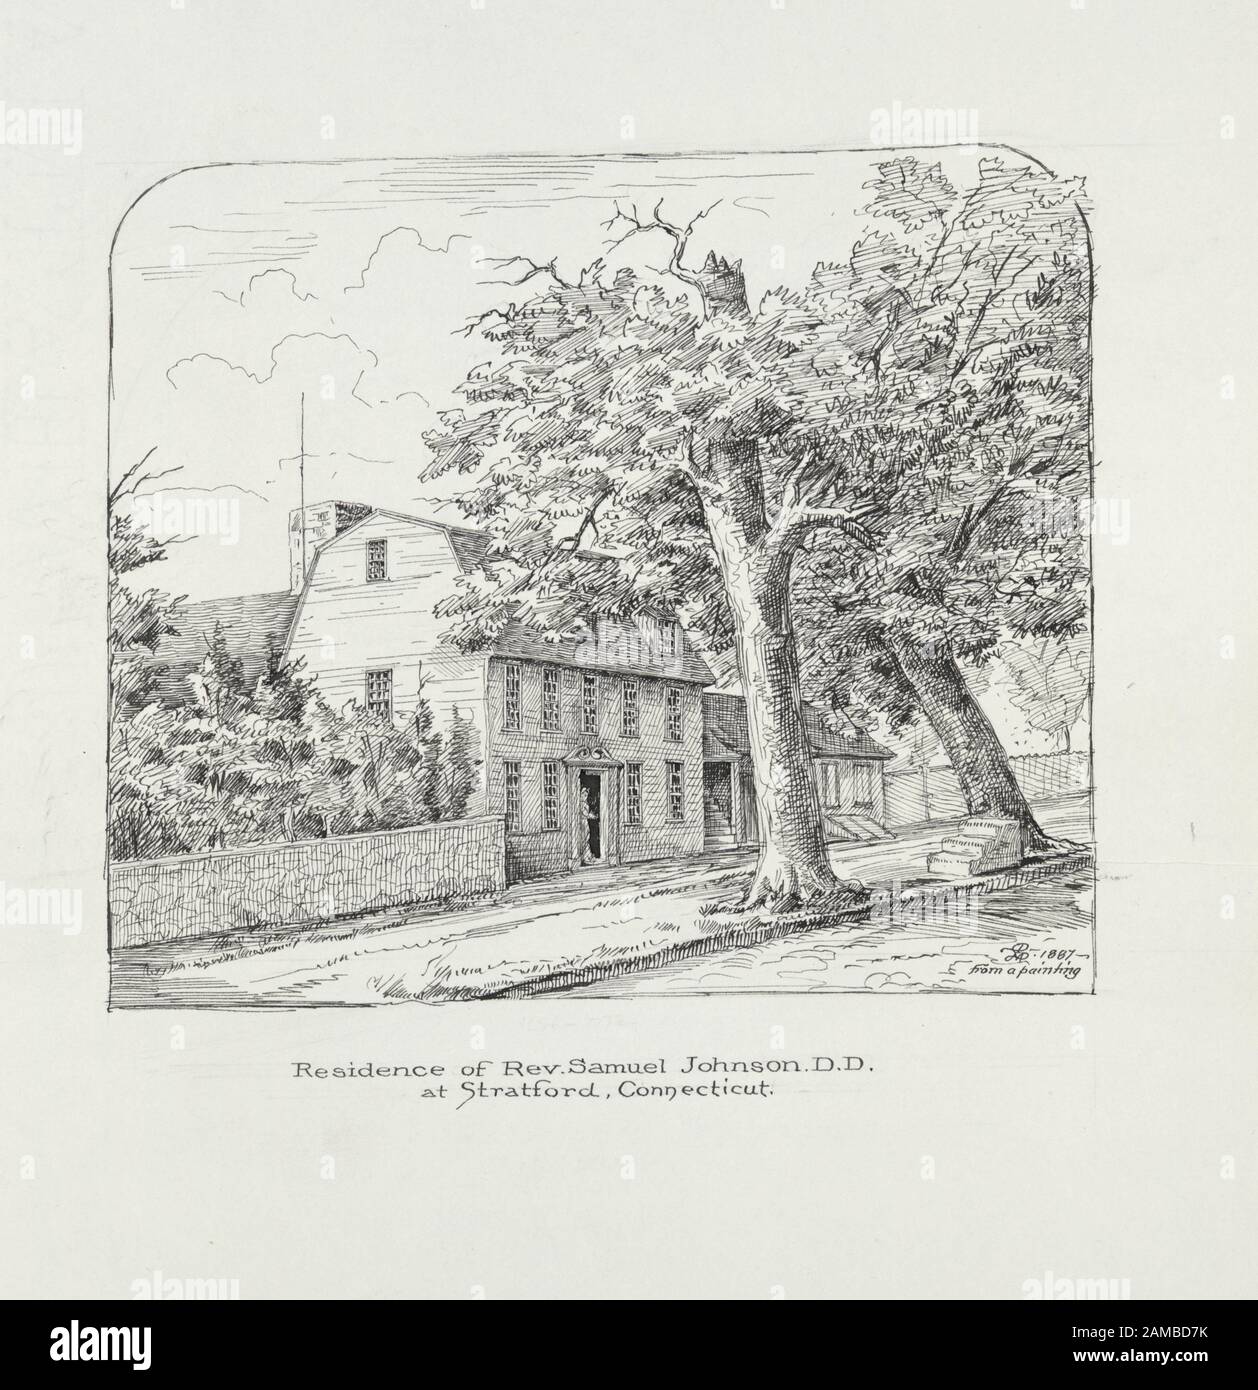 Residence of Rev Samuel Johnson DD at Stratford, Connecticut  Printmakers include J.C. Buttre, Henry Bryan Hall, S.S. Jocelyn, T. Johnson, J.B. Longacre, Albert Rosenthal and Max Rosenthal.  Draughtsmen include David McNeely Stauffer. Title from Calendar of Emmet Collection. Citation/reference : EM616; Residence of Rev. Samuel Johnson D.D. at Stratford, Connecticut. Stock Photo